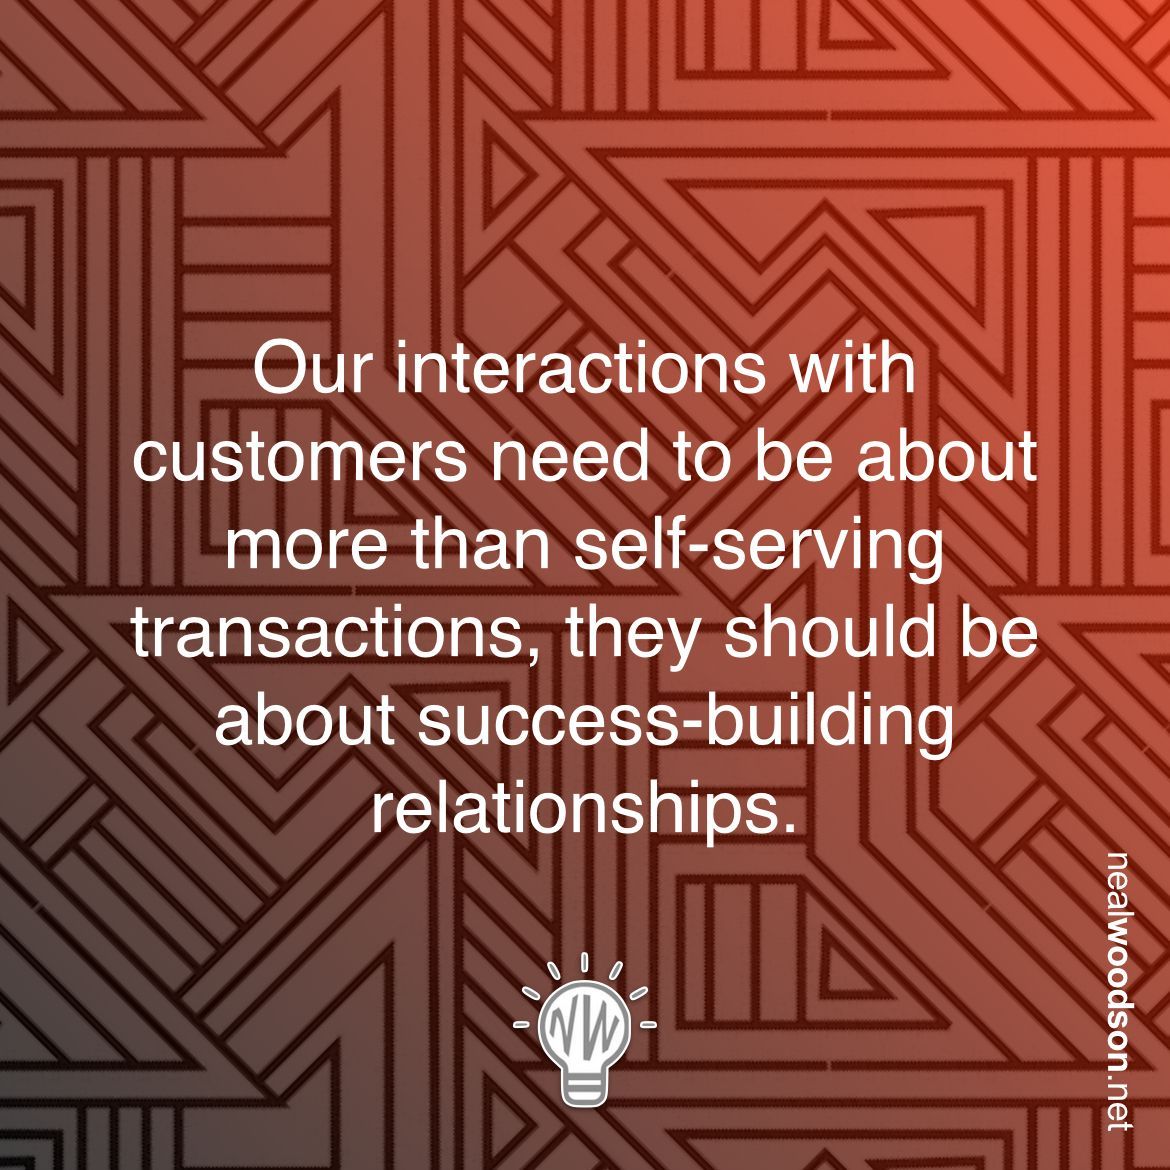 Our interactions with customers need to be about more than self-serving transactions, they should be about success-building relationships.
#hospitality #humanexperience #customerexperience